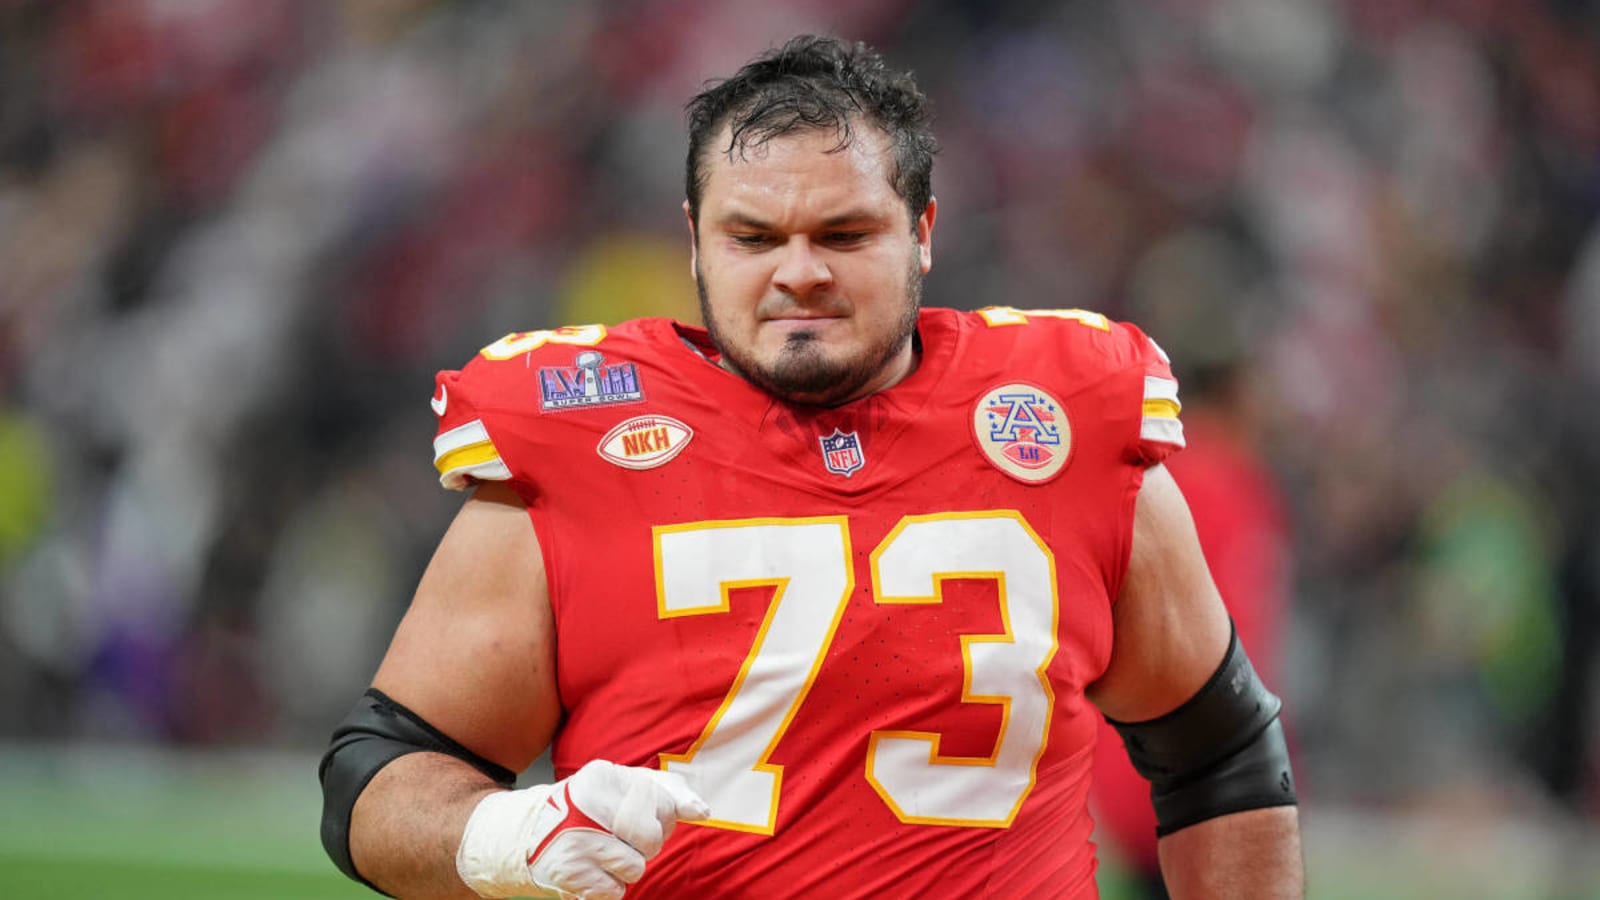 Chiefs Super Bowl Hero Allegretti Signs with Commanders: Details